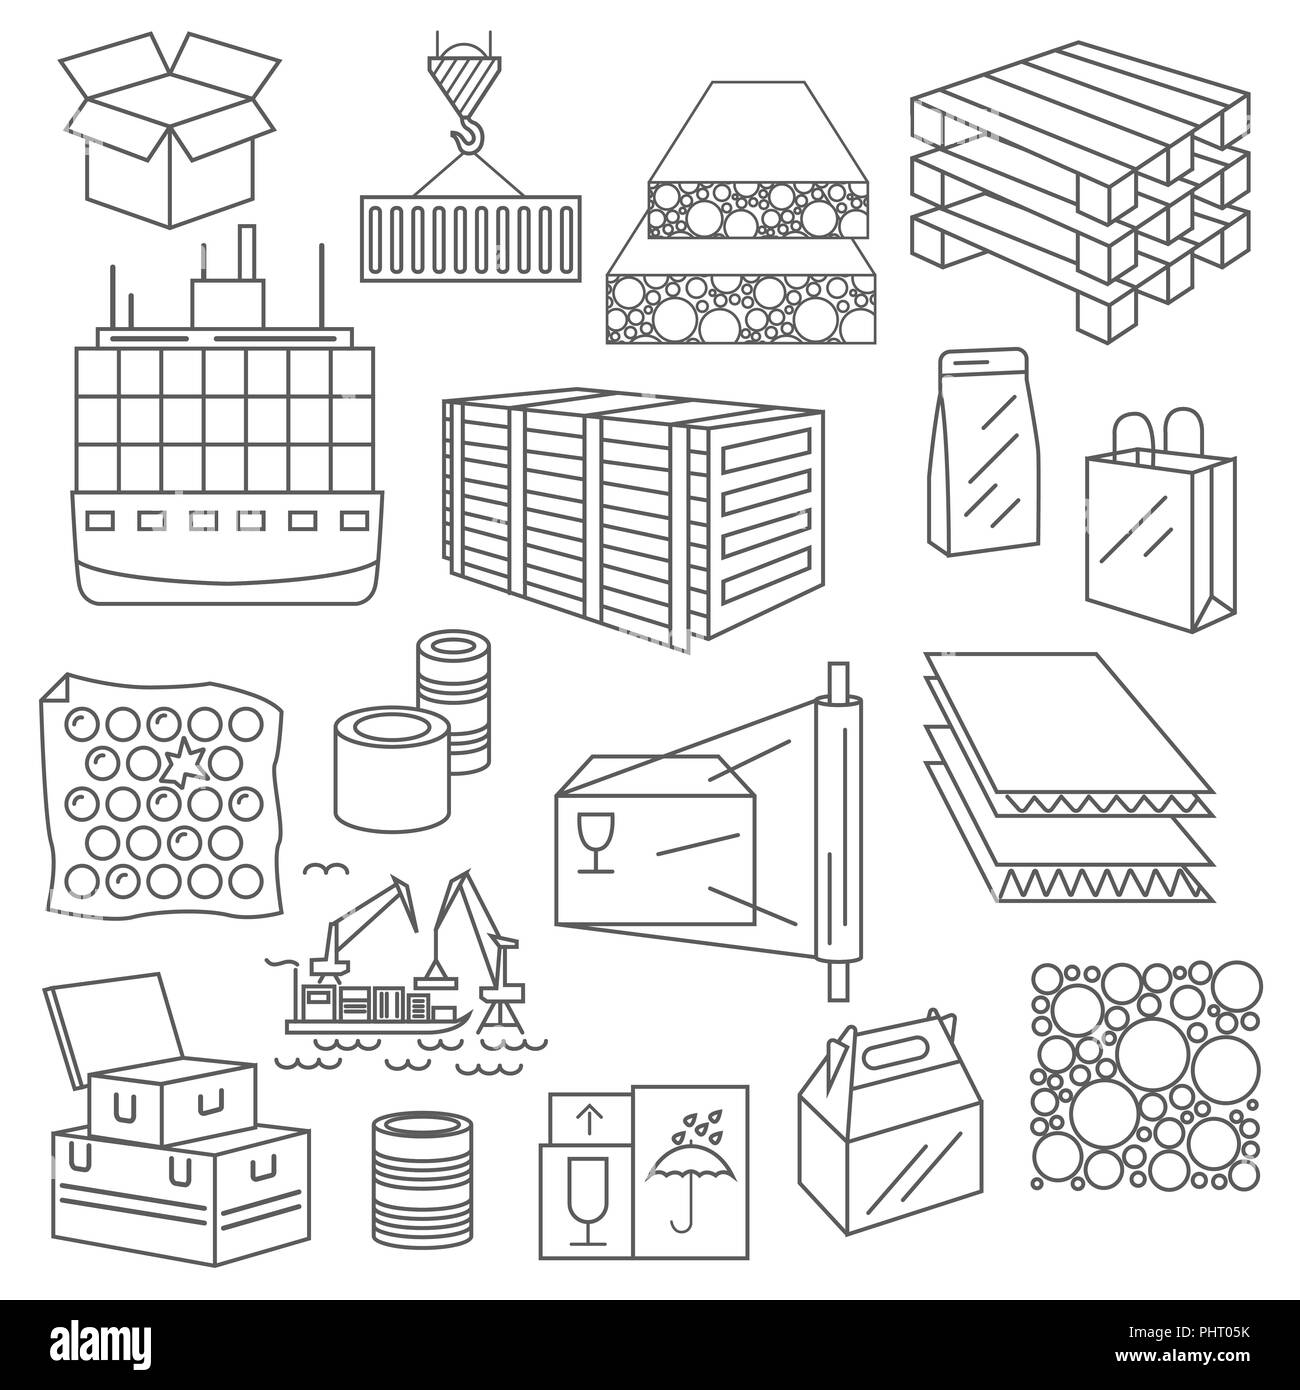 Containers and packaging icon set. Thin line design isolated on white. Create your industrial infographics collection. Vector illustration Stock Vector